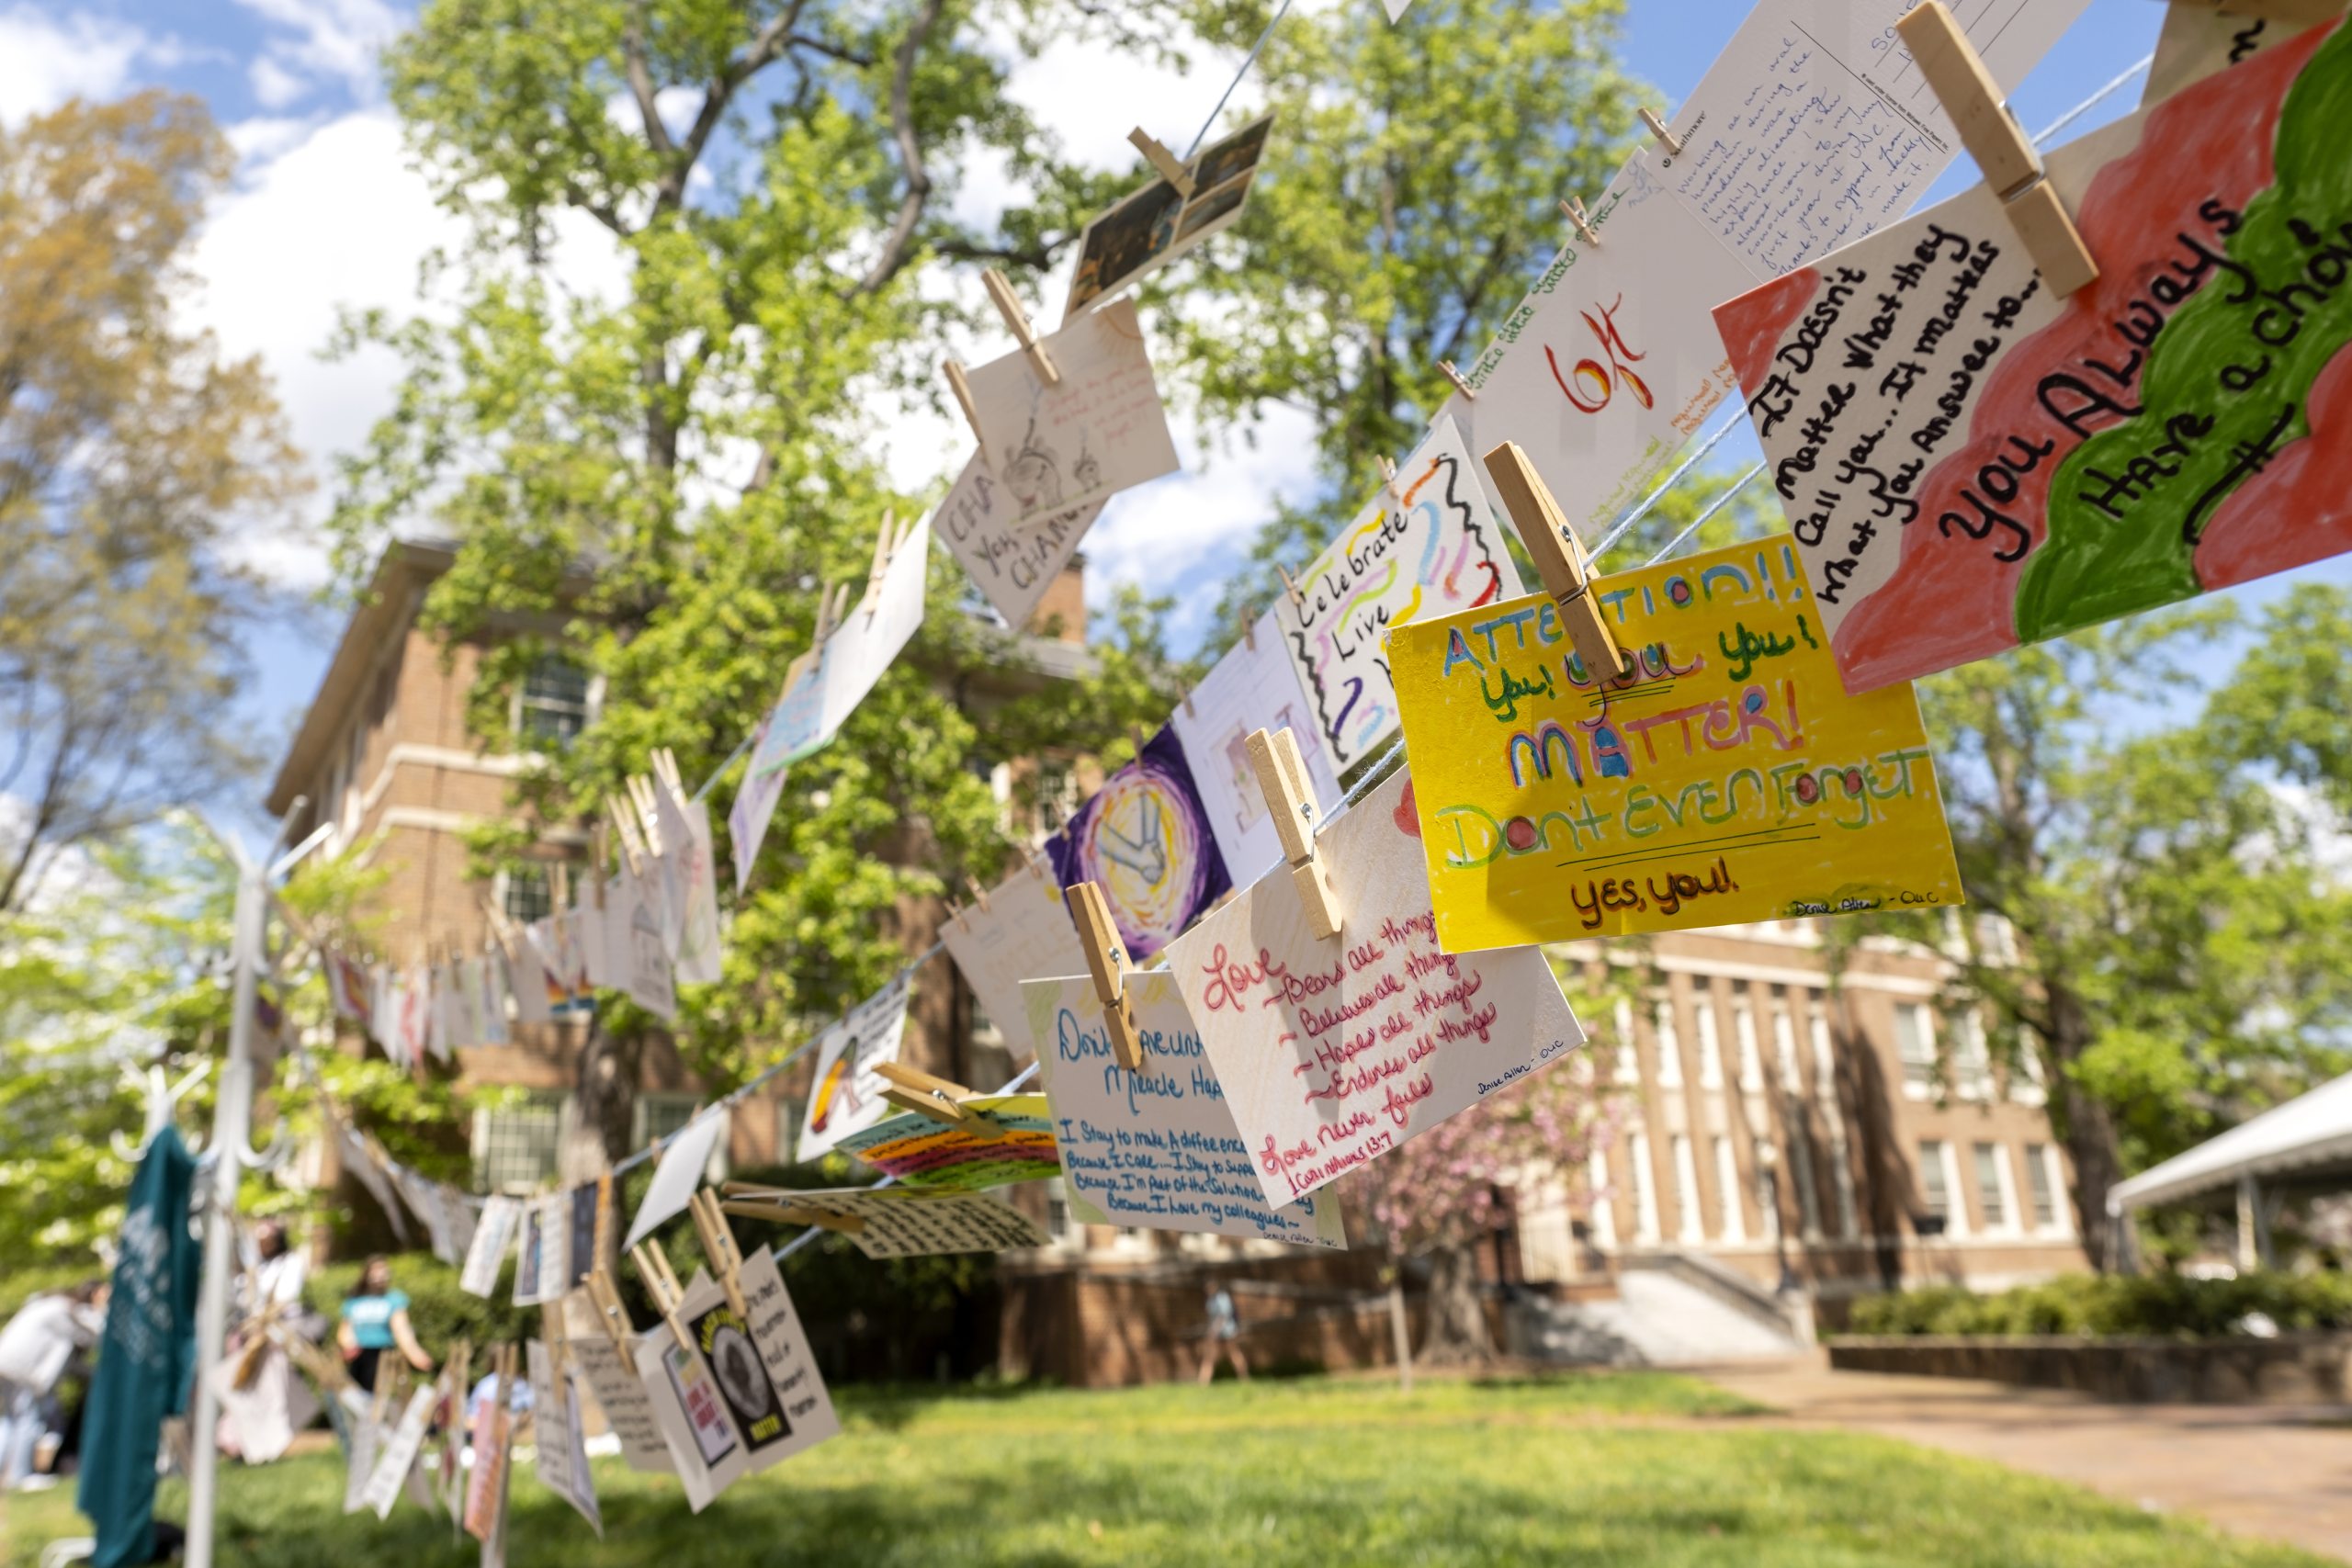 Postcards with messages and art expressing the feelings of Carolina students, faculty and staff hang from yarn during Arts Everywhere Day.